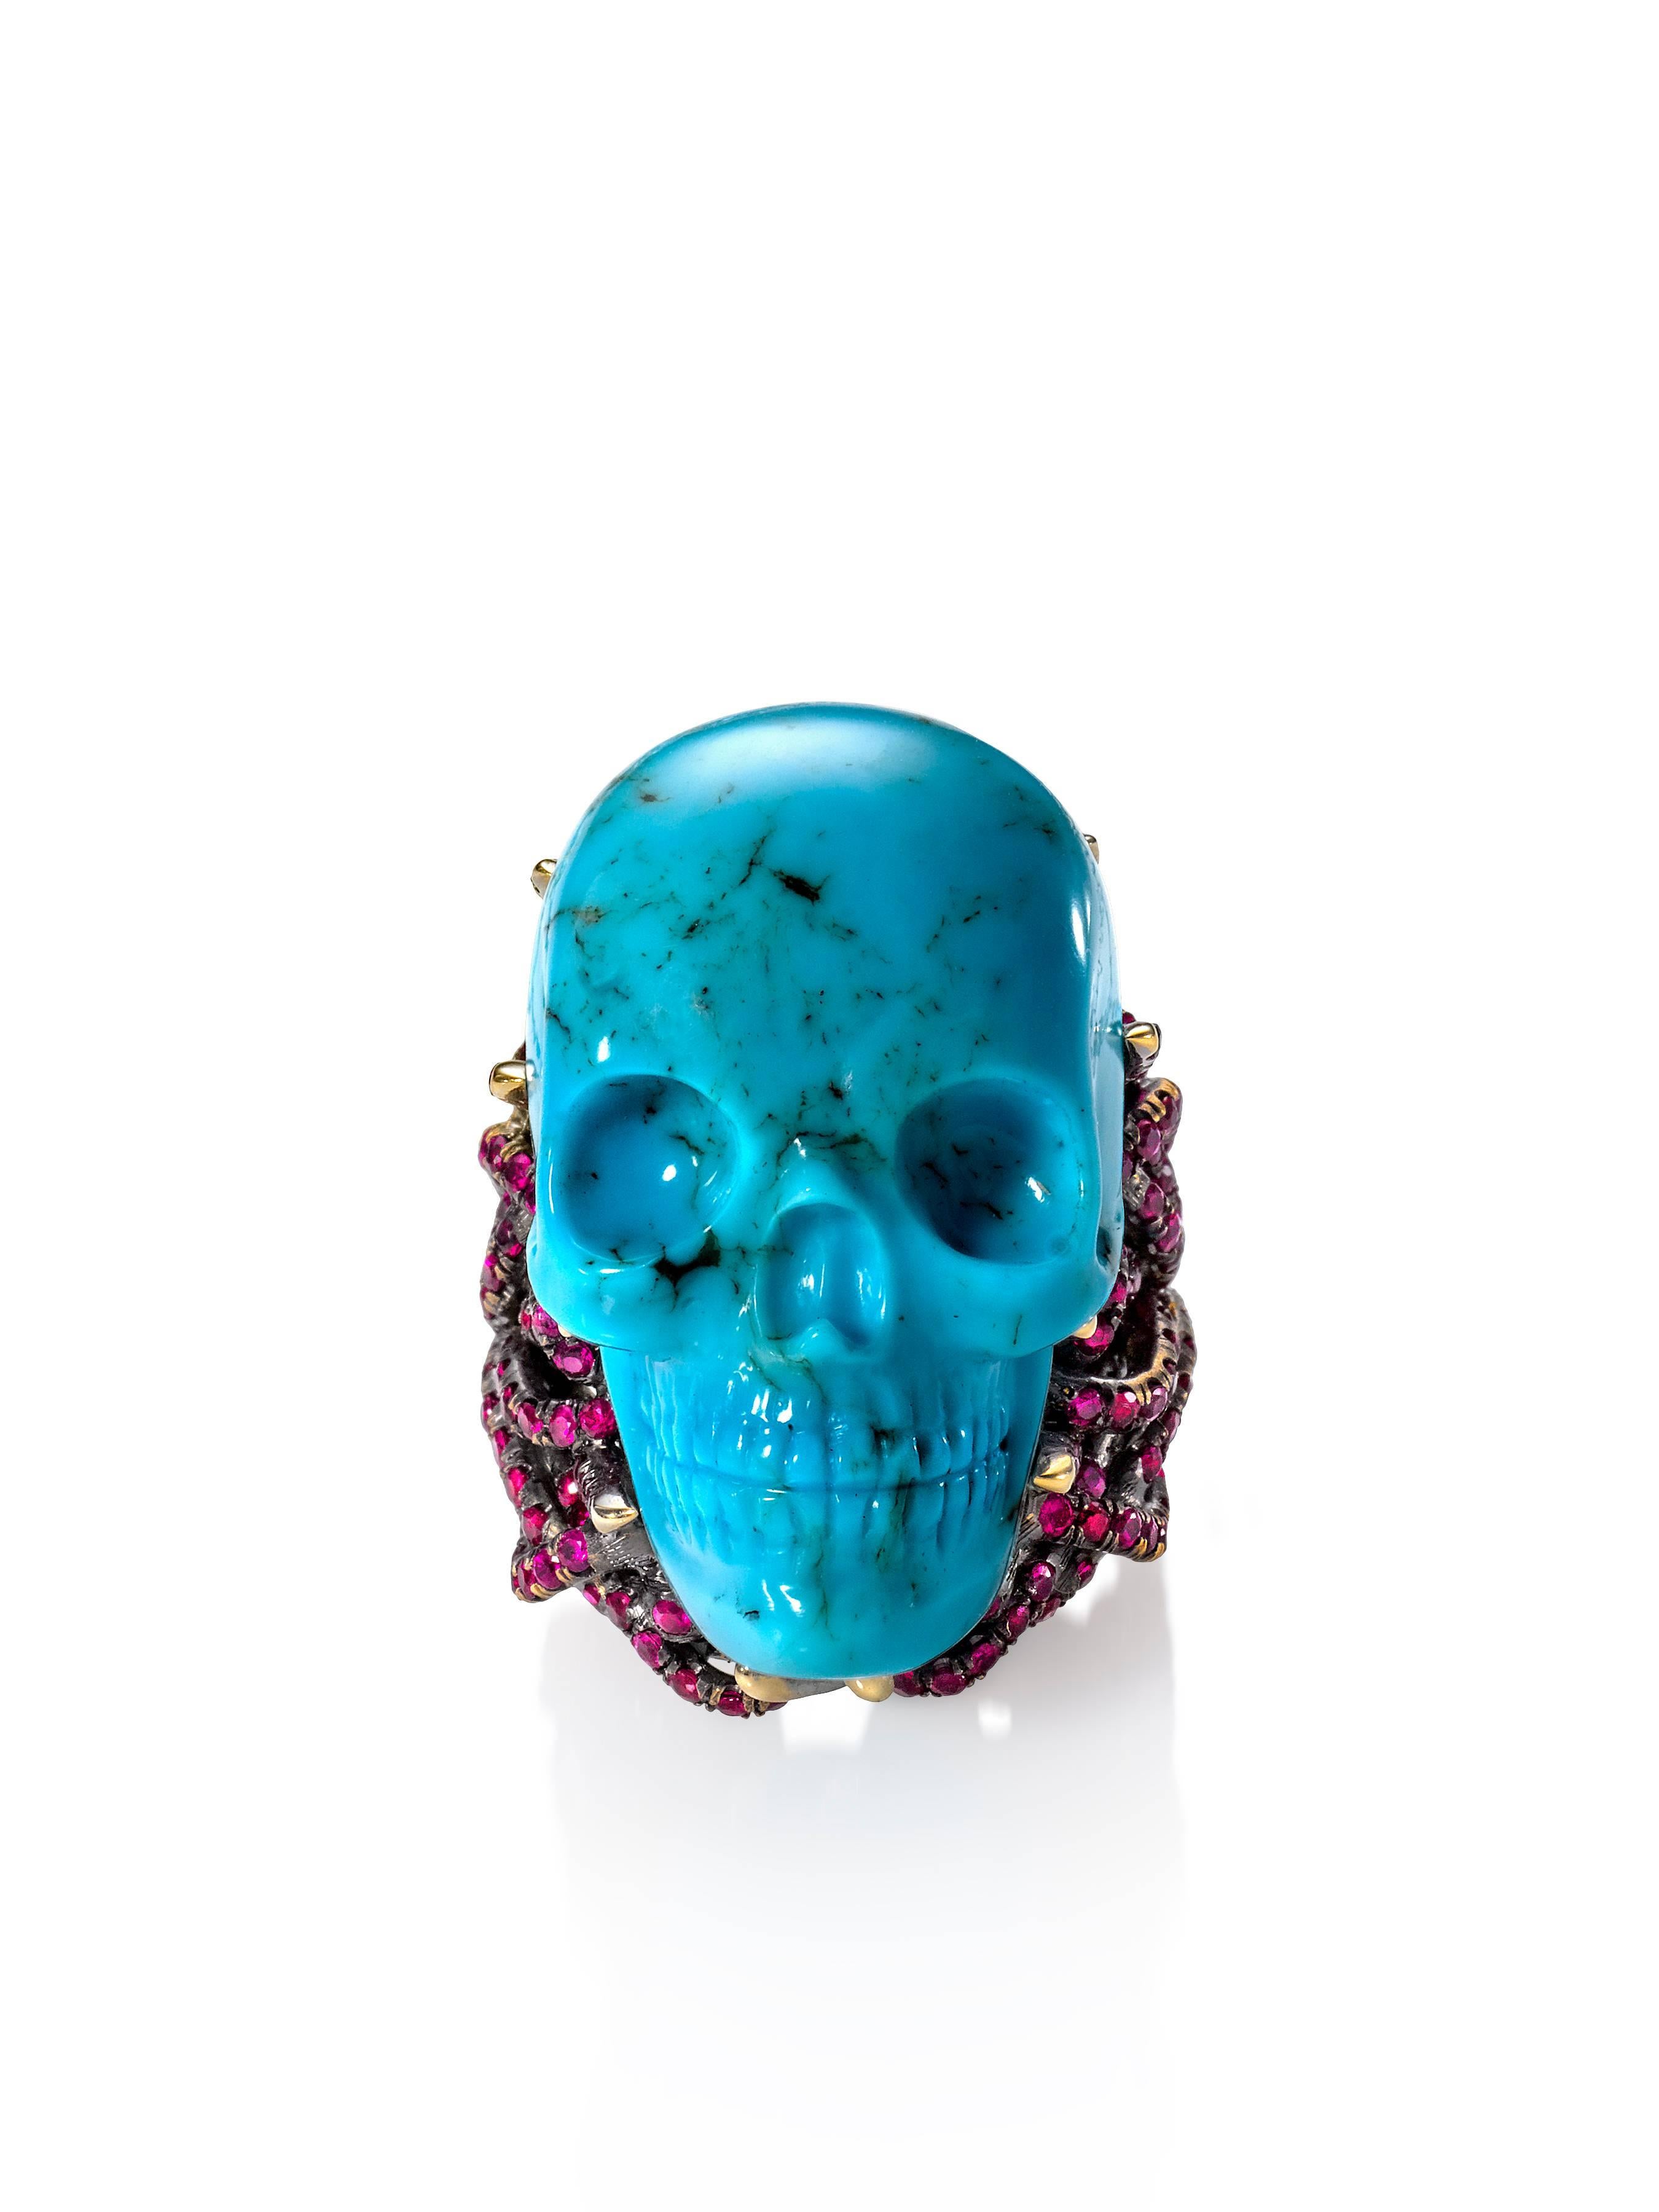 18k yellow gold, satin finish.
Hand-carved turquoise skull.
192 custom-cut rubies, totaling 1.94 carats.
Size 6.
One-of-a-kind.
Made in New York City.
As seen on supermodel Bella Hadid on the cover of Paper Magazine.
As seen on blogger Judith Boyd